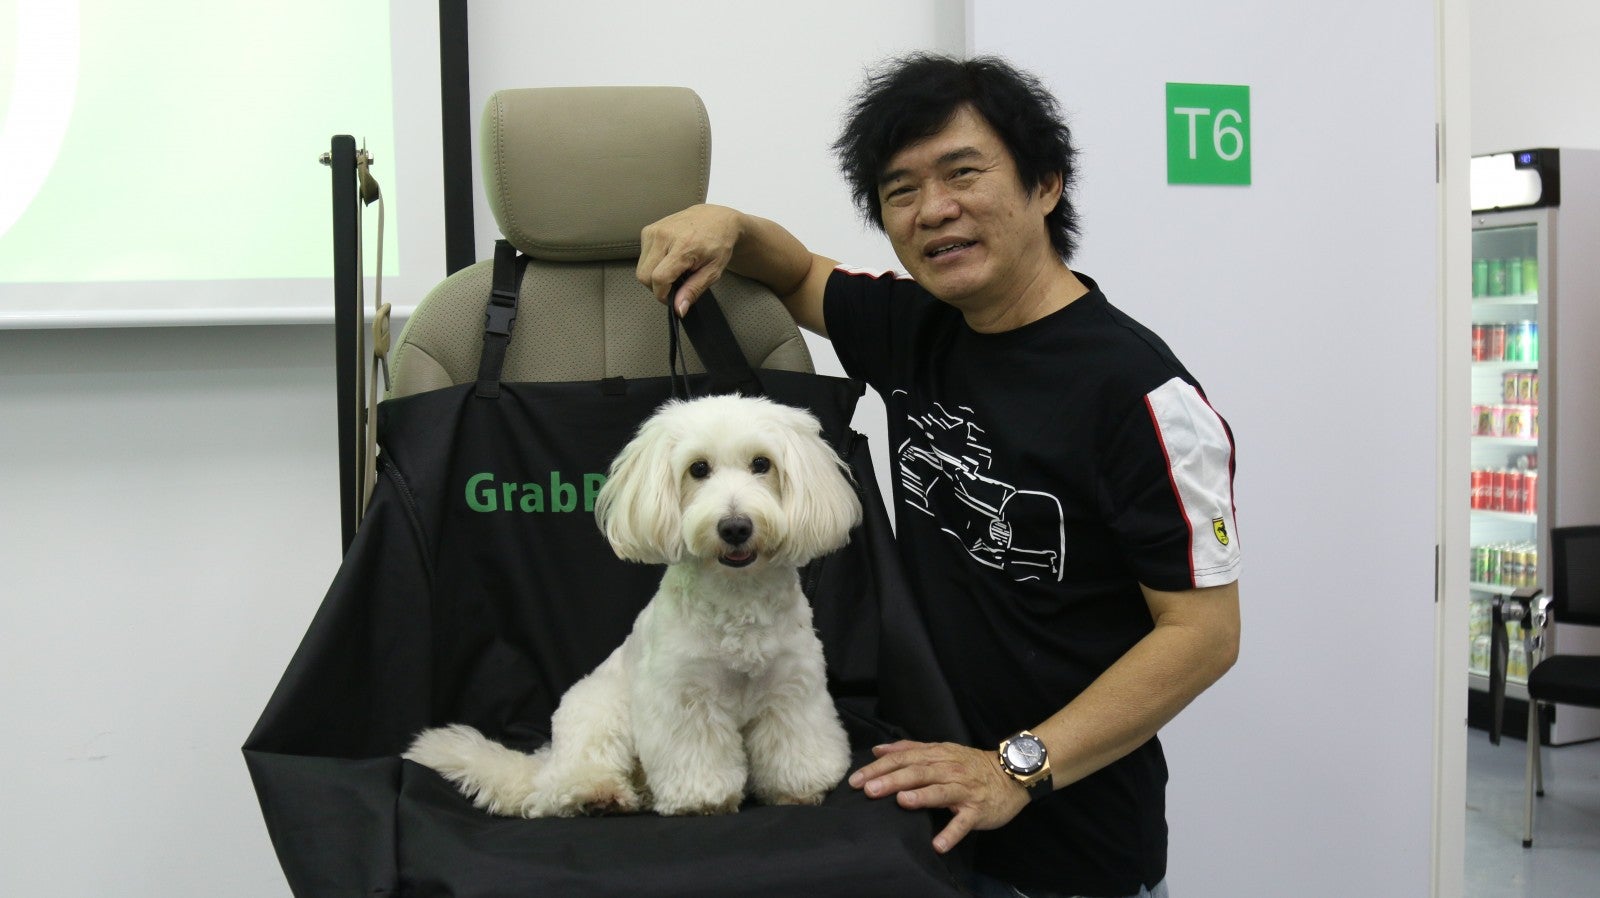 Grab Singapore Now Debuts GrabPet So You Can Travel With Your Four-legged Buddies! - WORLD OF BUZZ